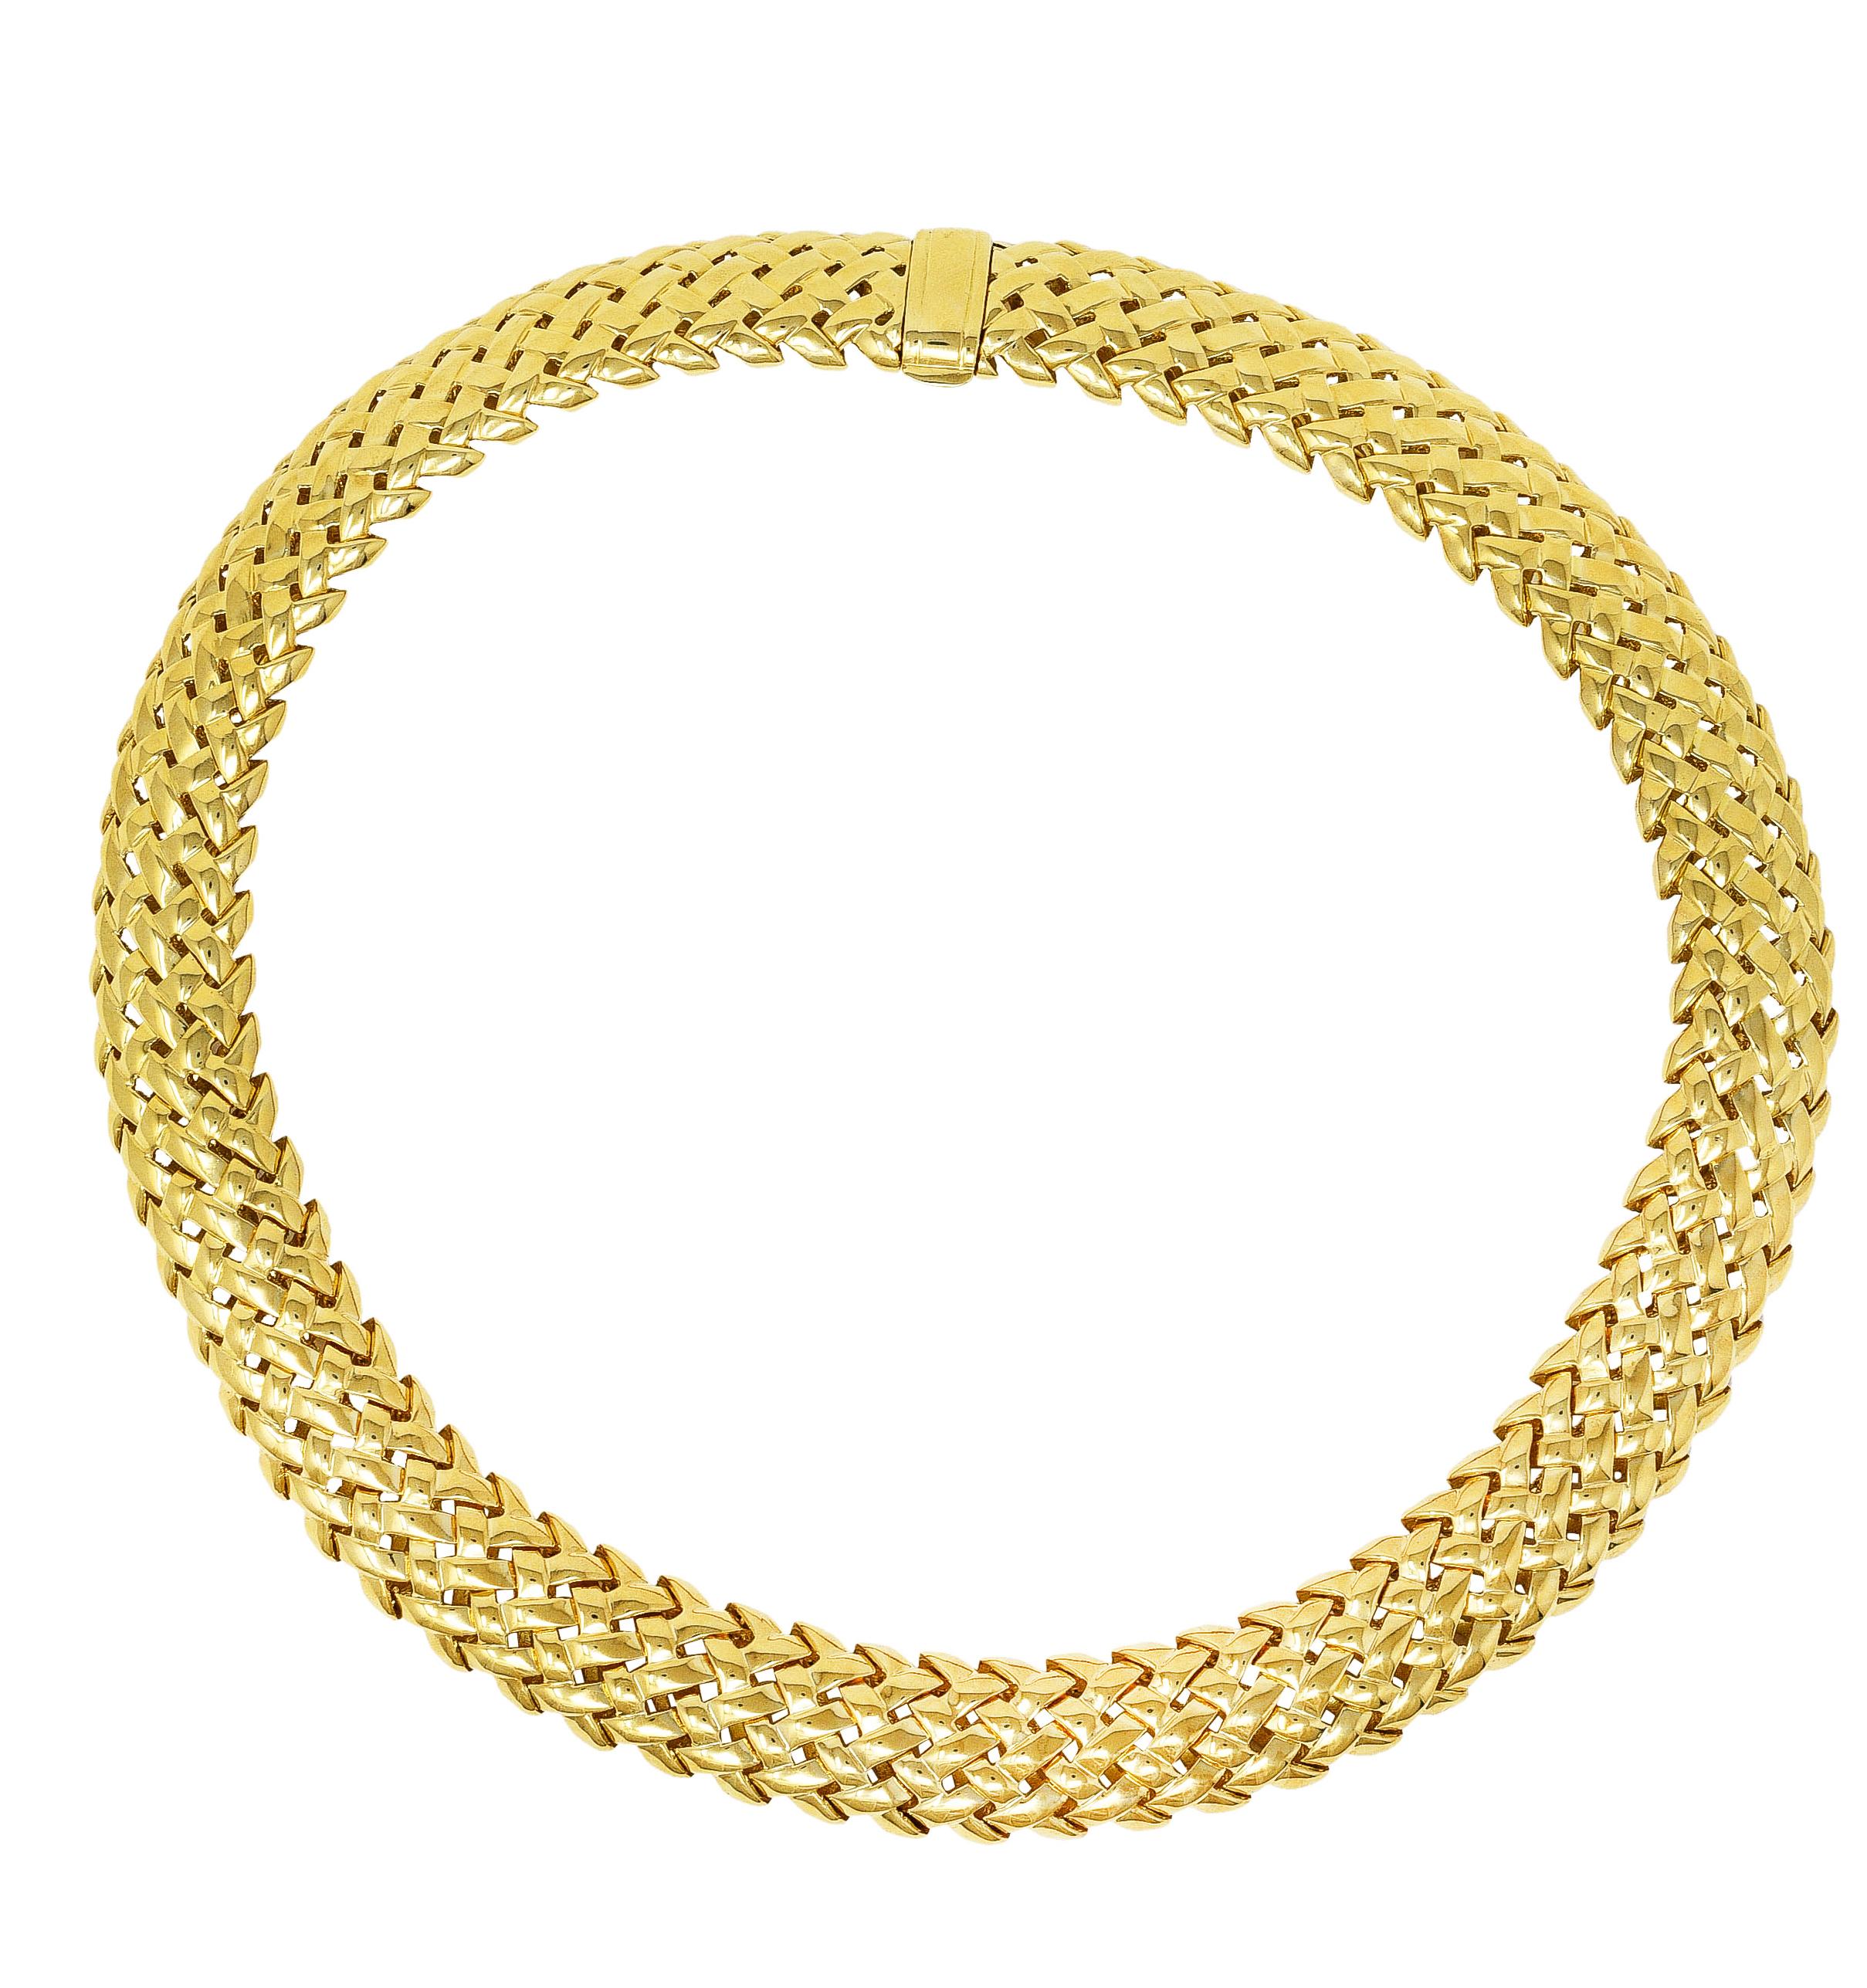 Collar style necklace comprised of articulated chevron links

Chevron links designed as basket-weave motif 

With high polish finish

Completed by hinged clasp 

Stamped 750 for 18 karat gold

Fully signed Tiffany & Co. 1989 

Length: 15 inches